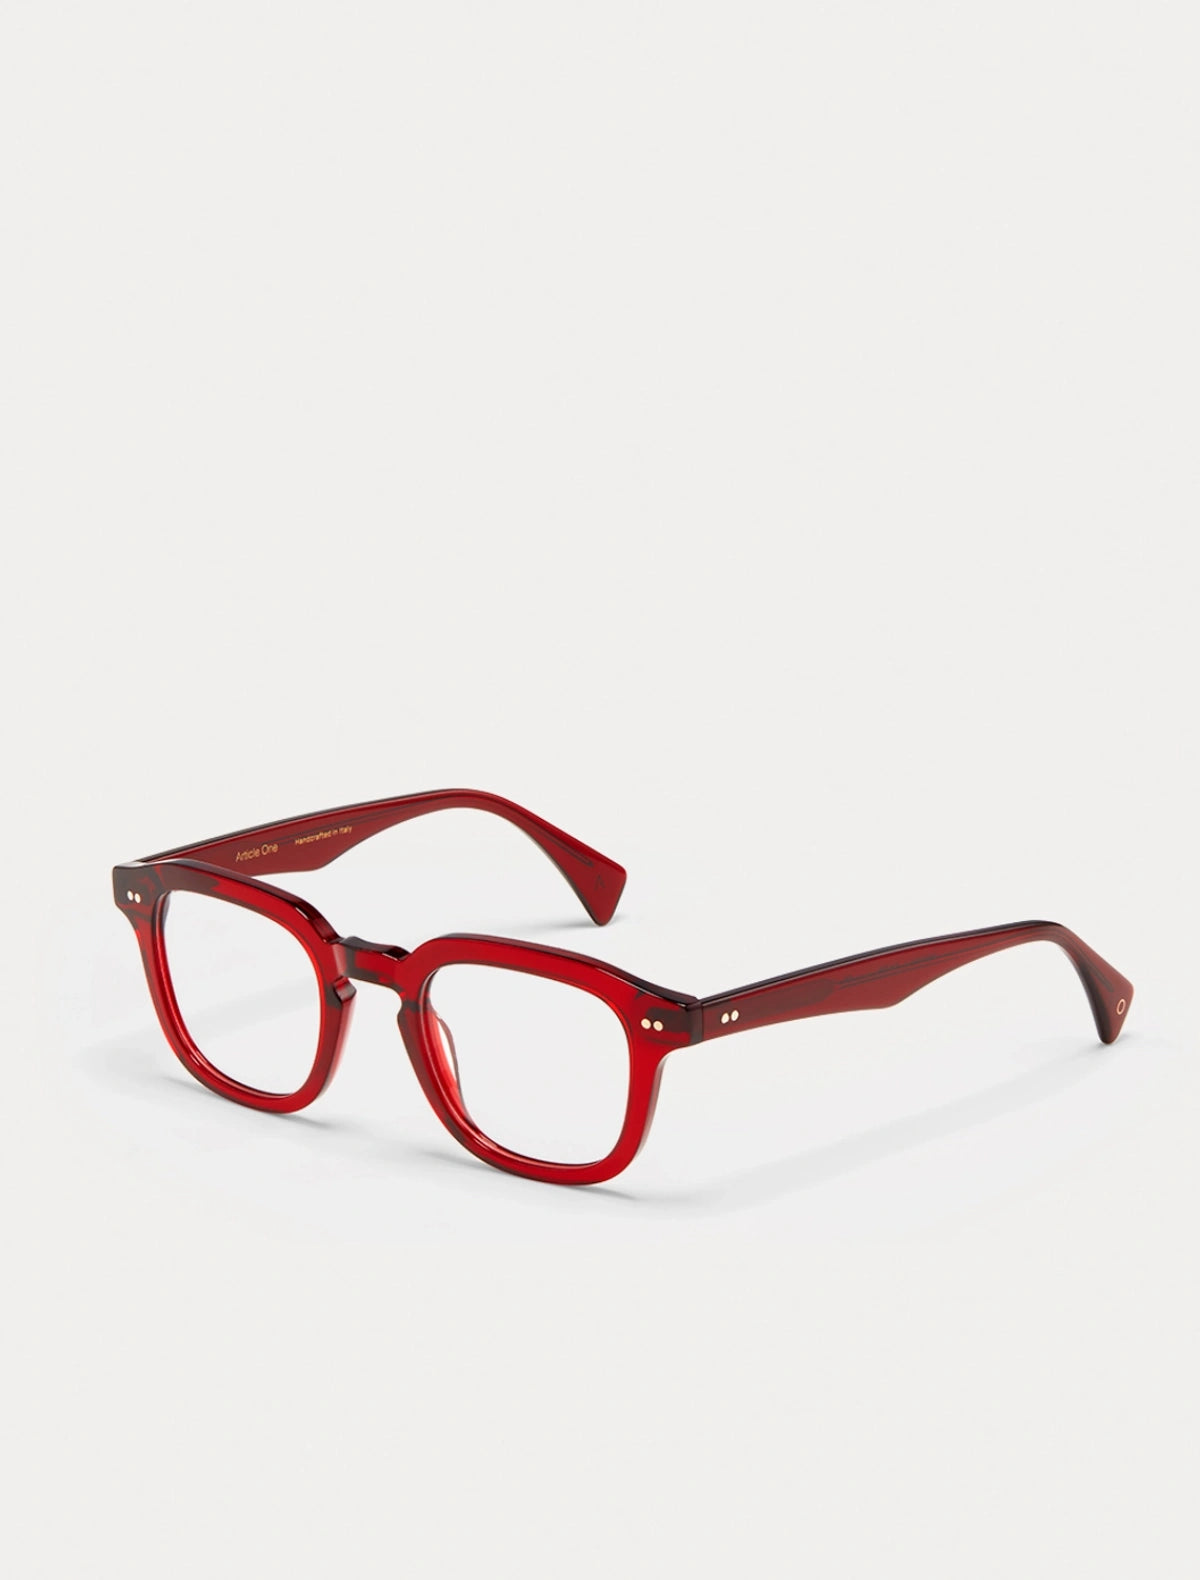 Red prescription eyeglasses purchased online at The Optical Co 